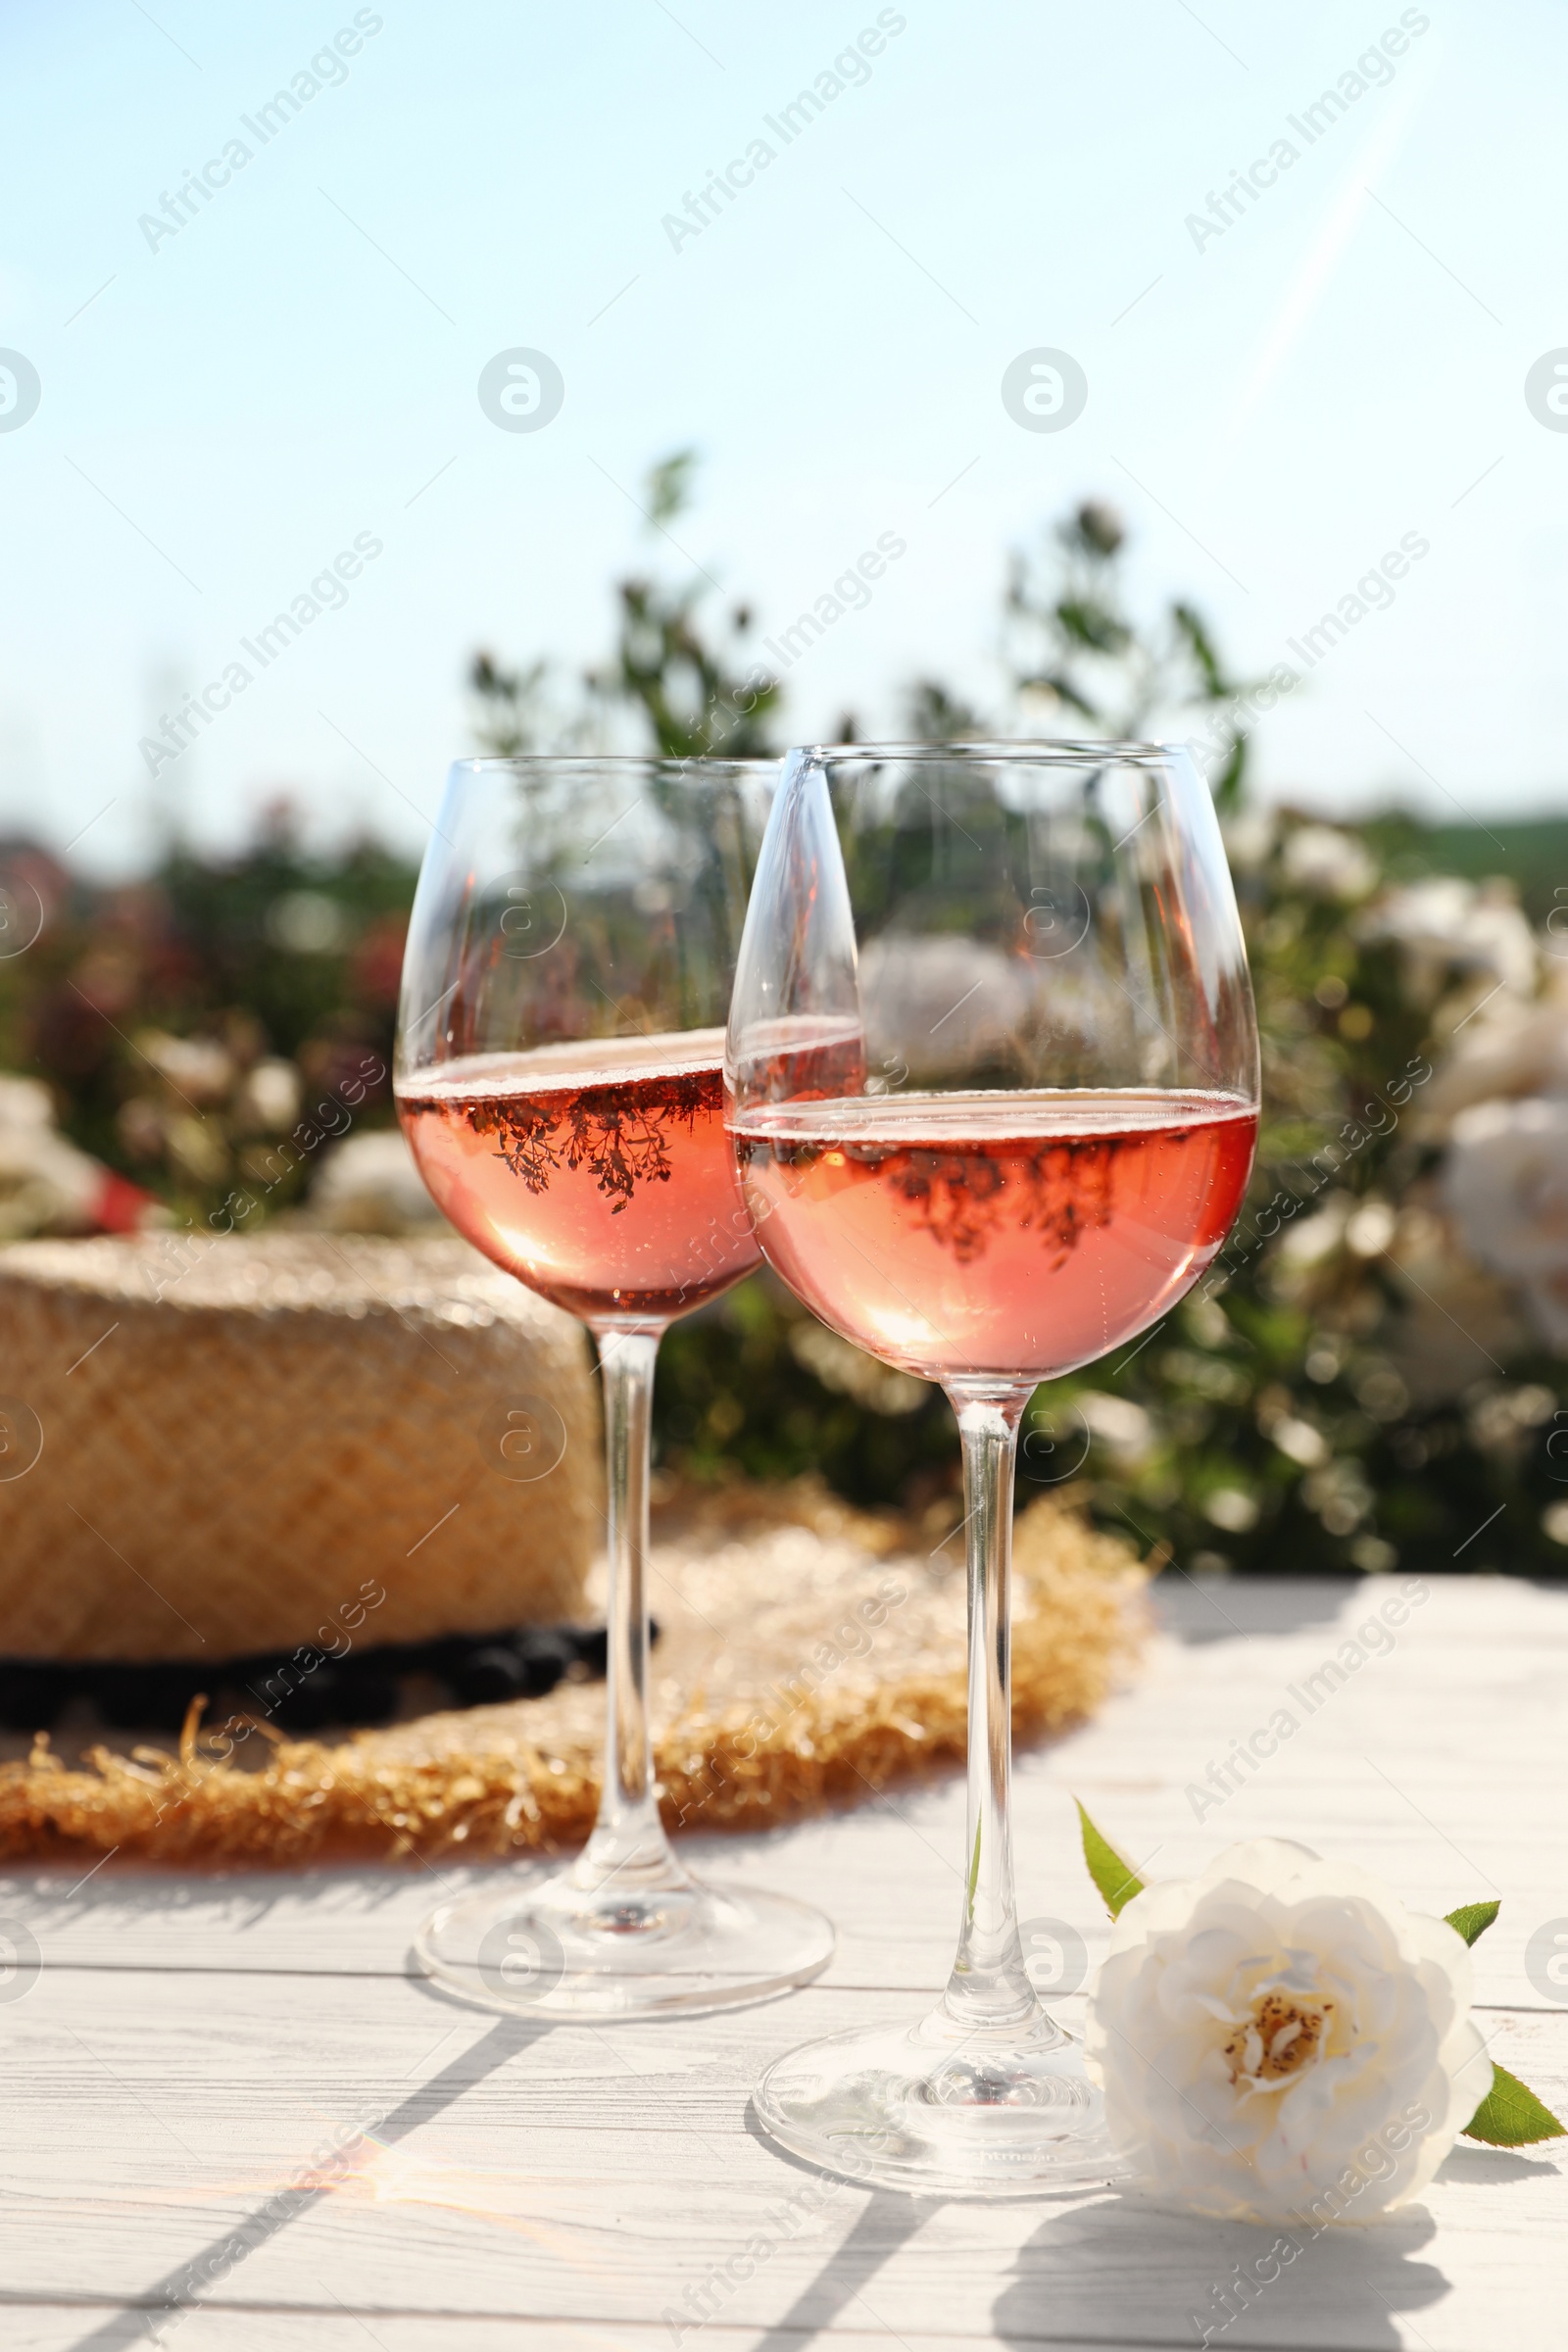 Photo of Glasses of rose wine, straw hat and beautiful flower on white wooden table outdoors